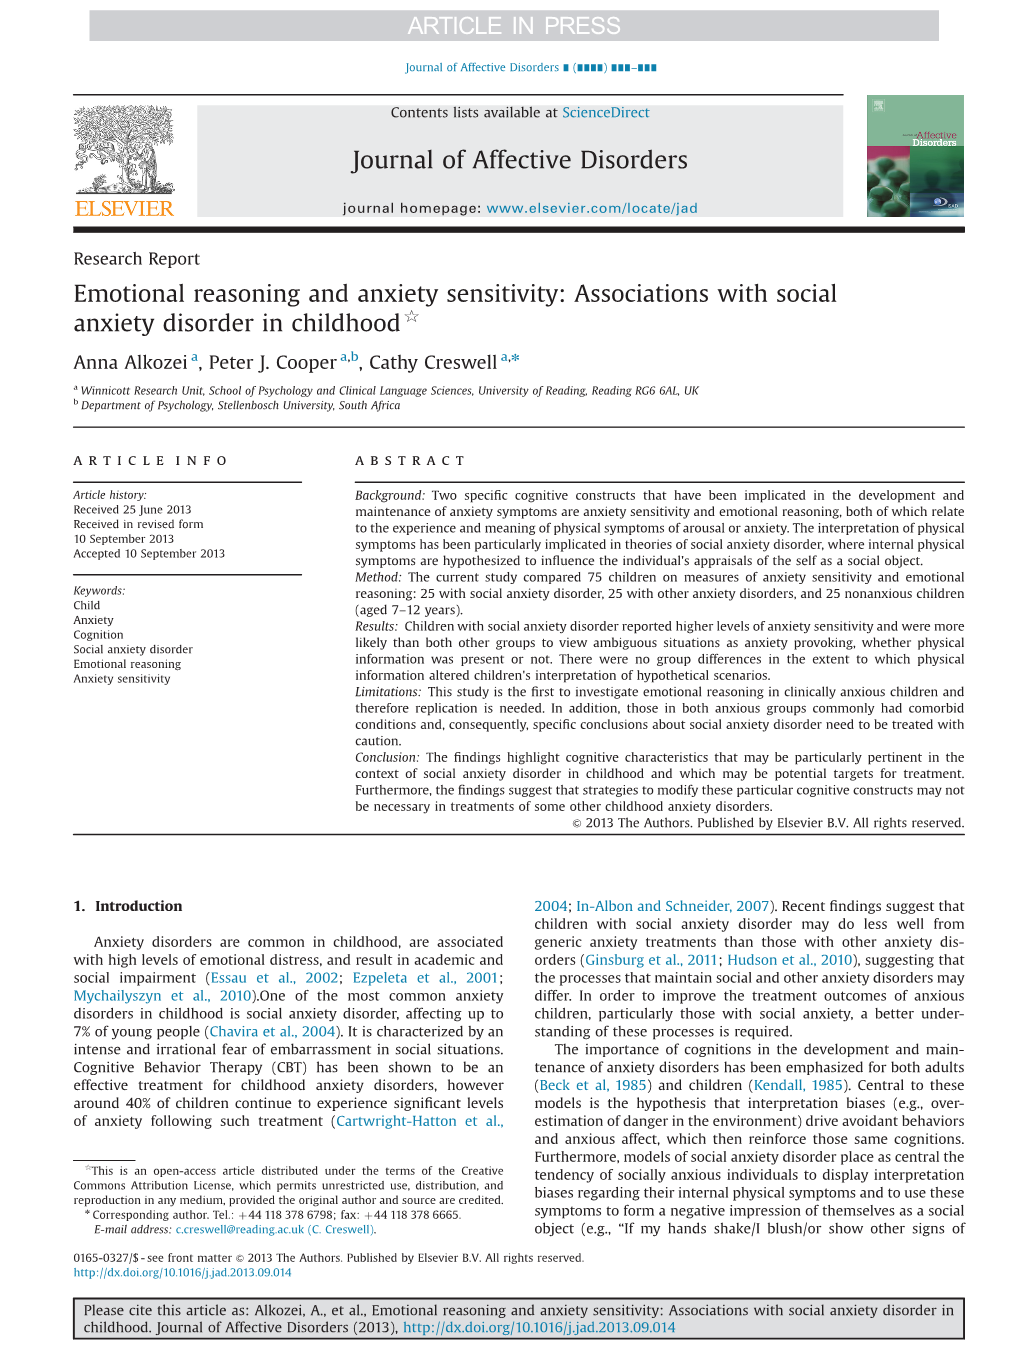 Emotional Reasoning and Anxiety Sensitivity Associations with Social